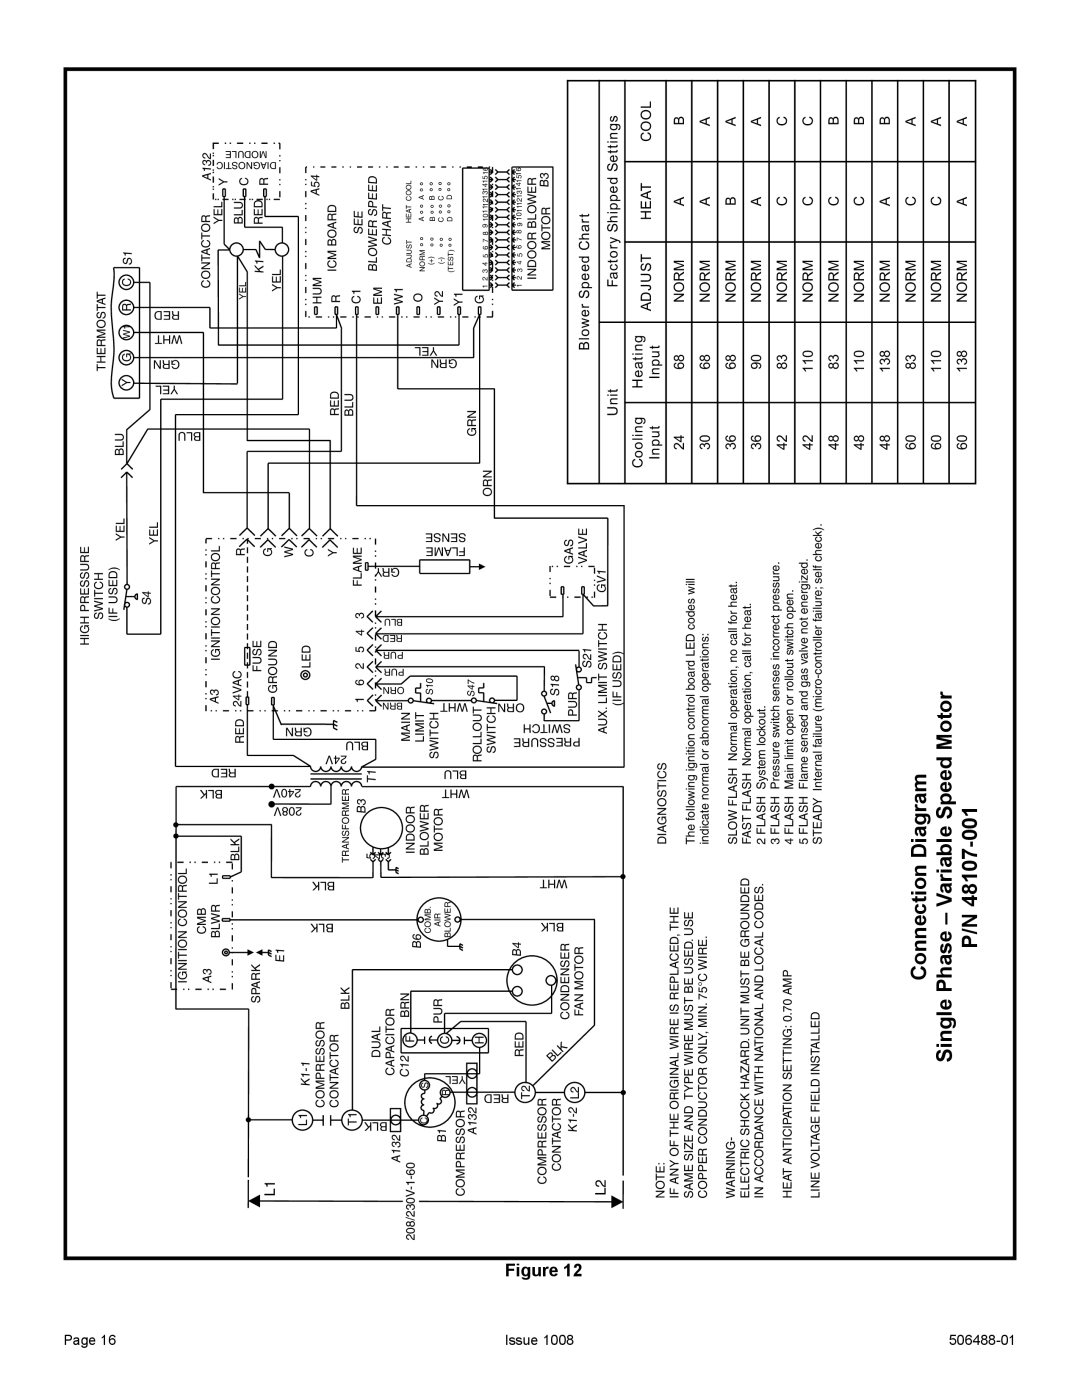 Allied Air Enterprises 4PGE manual Connection Diagram, Single Phase - Variable Speed Motor P/N, Issue 